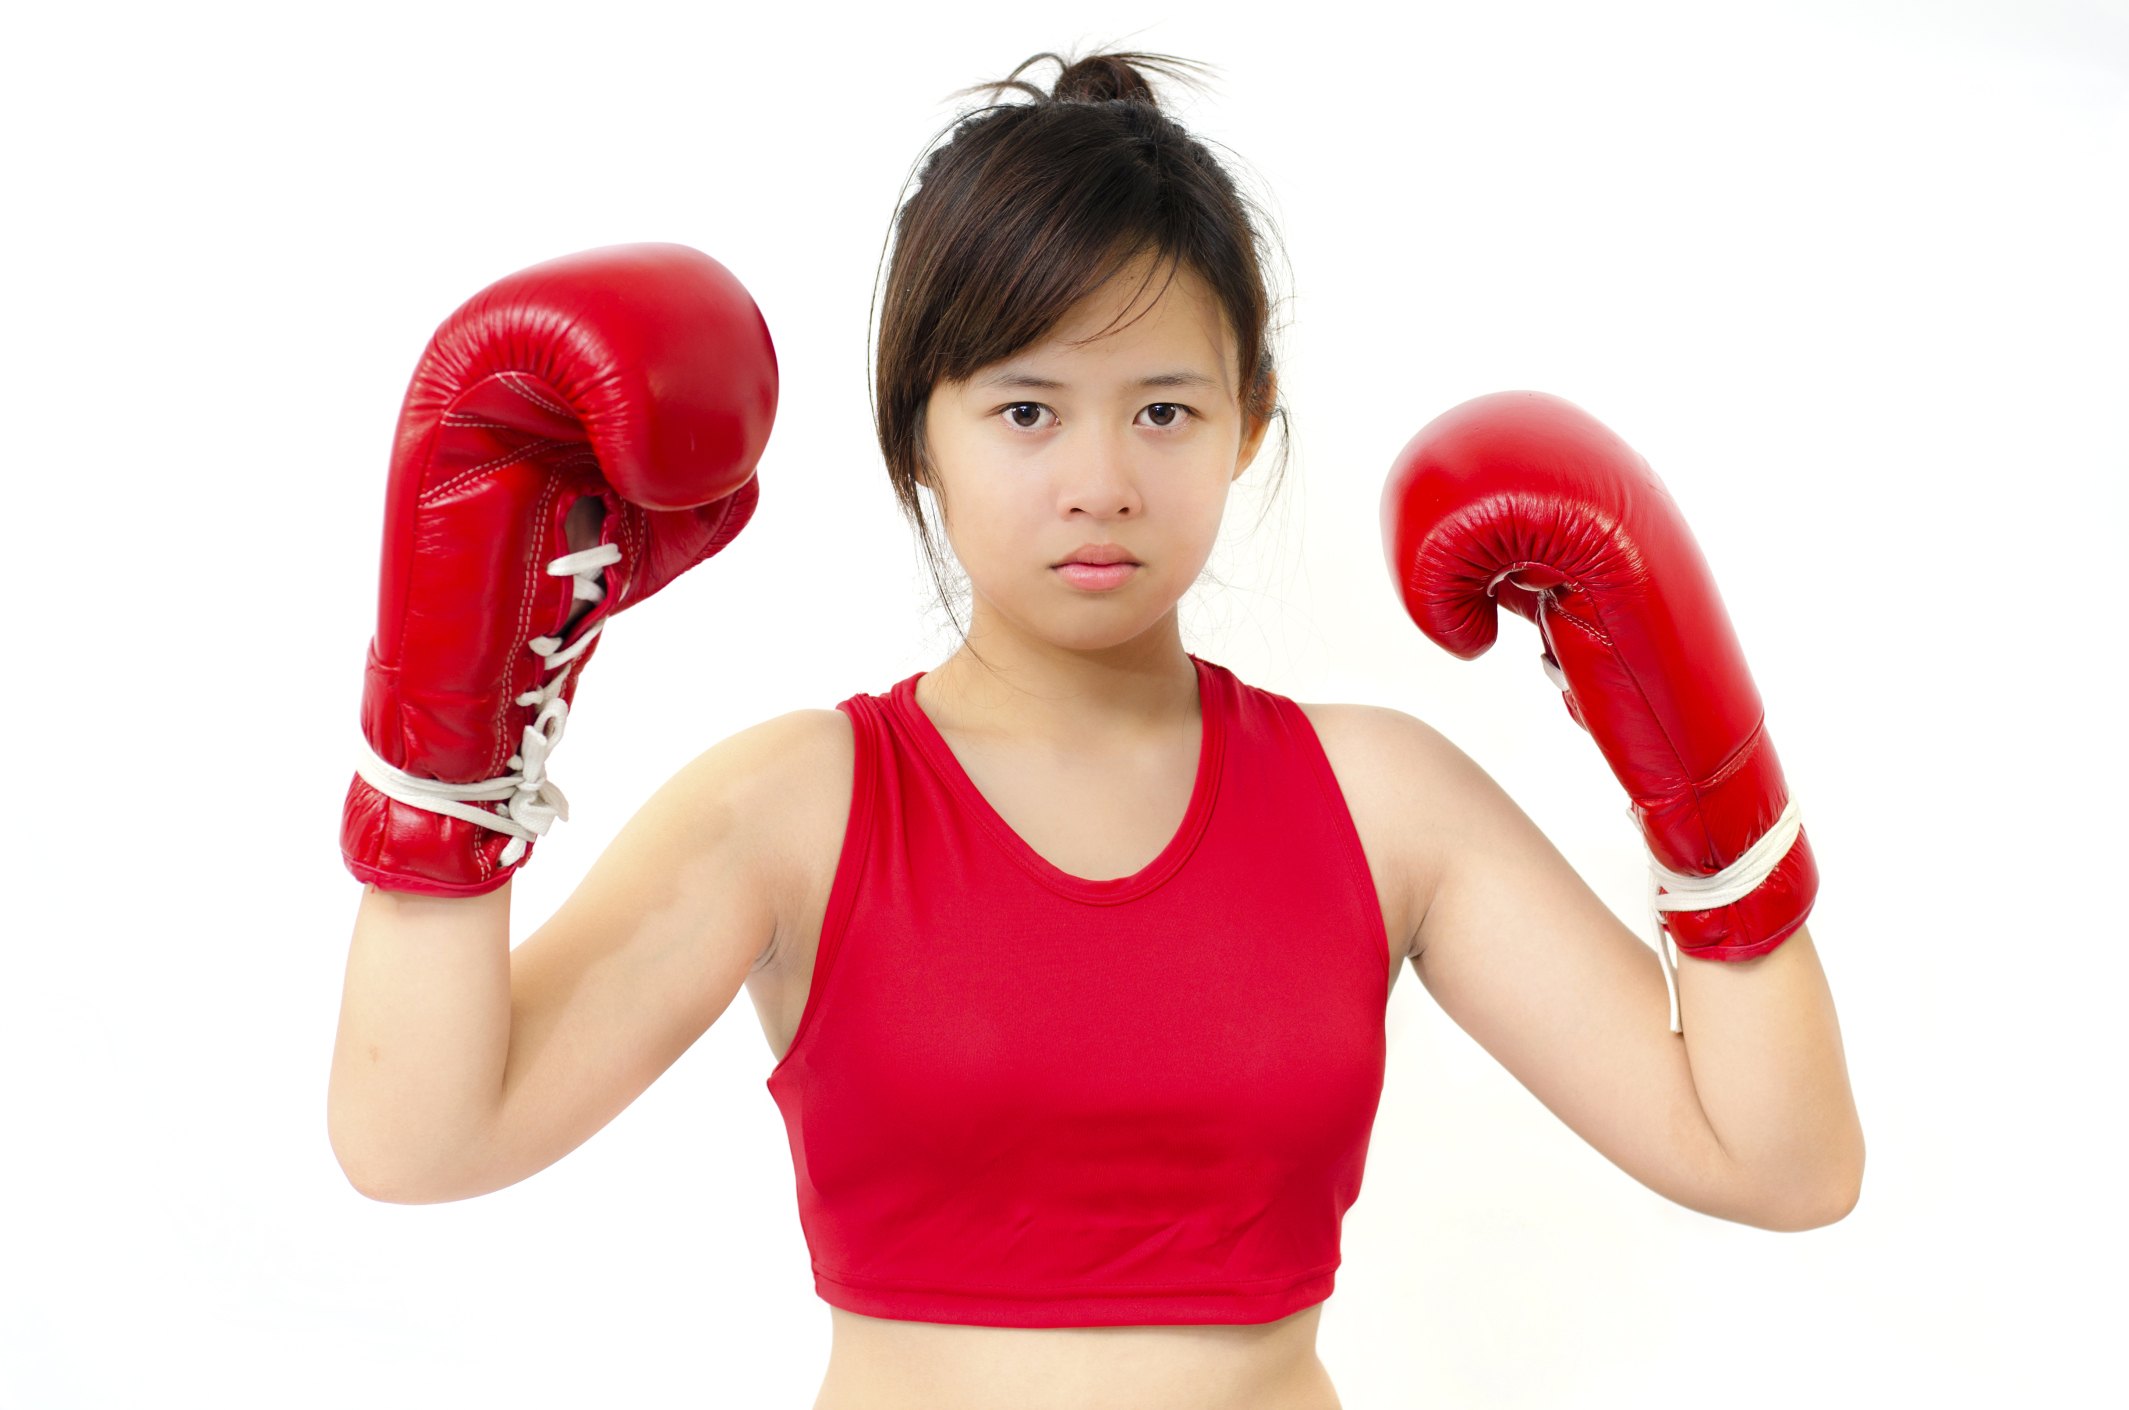 Homemade Boxing Costumes for Girls | eHow
 Homemade Female Boxer Costume